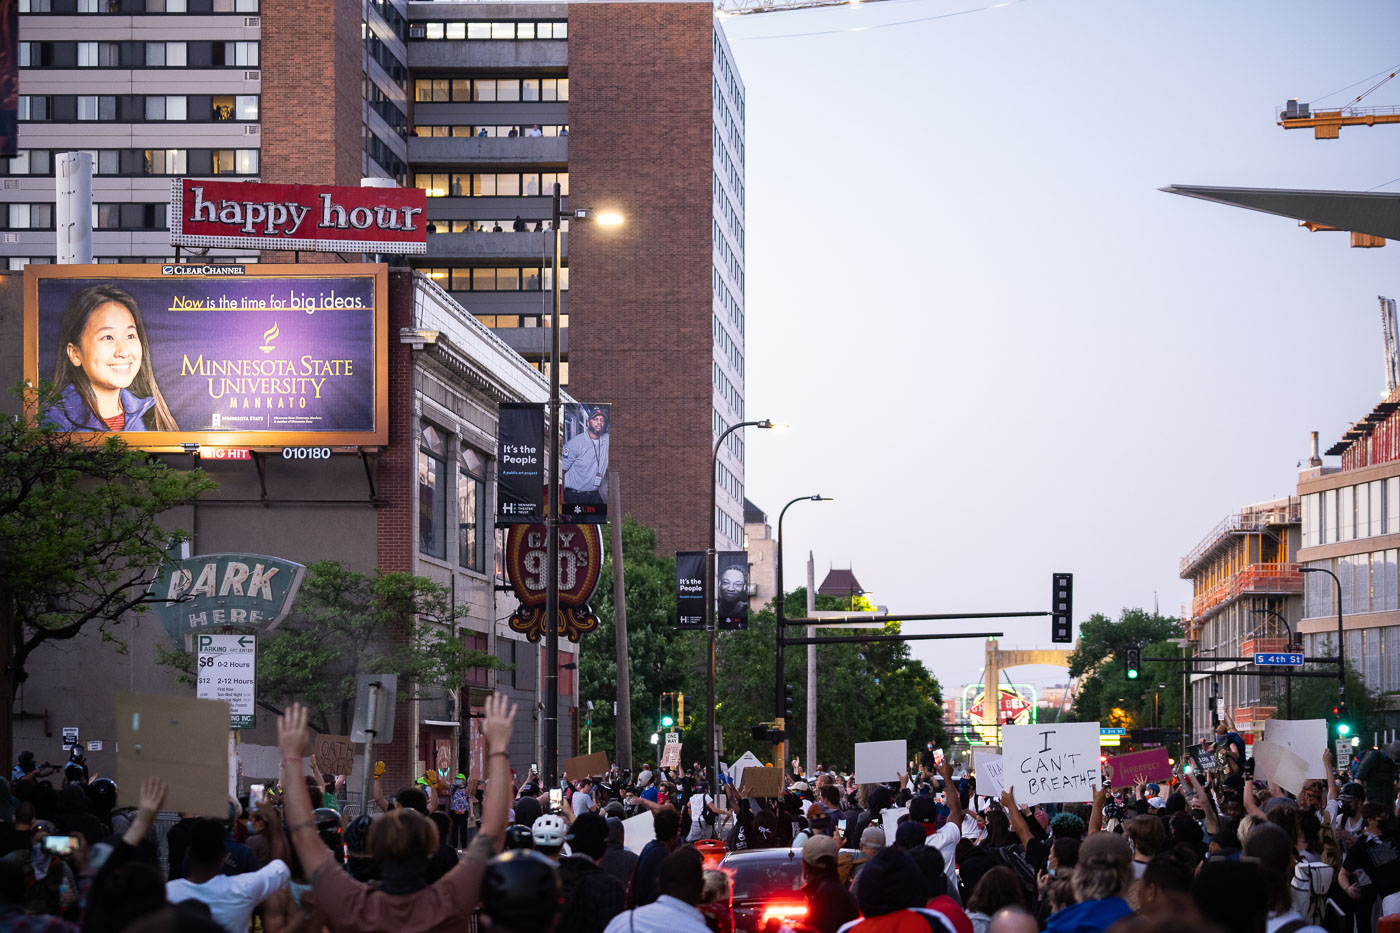 Protesters with their hands up on Hennepin Ave in Minneapolis